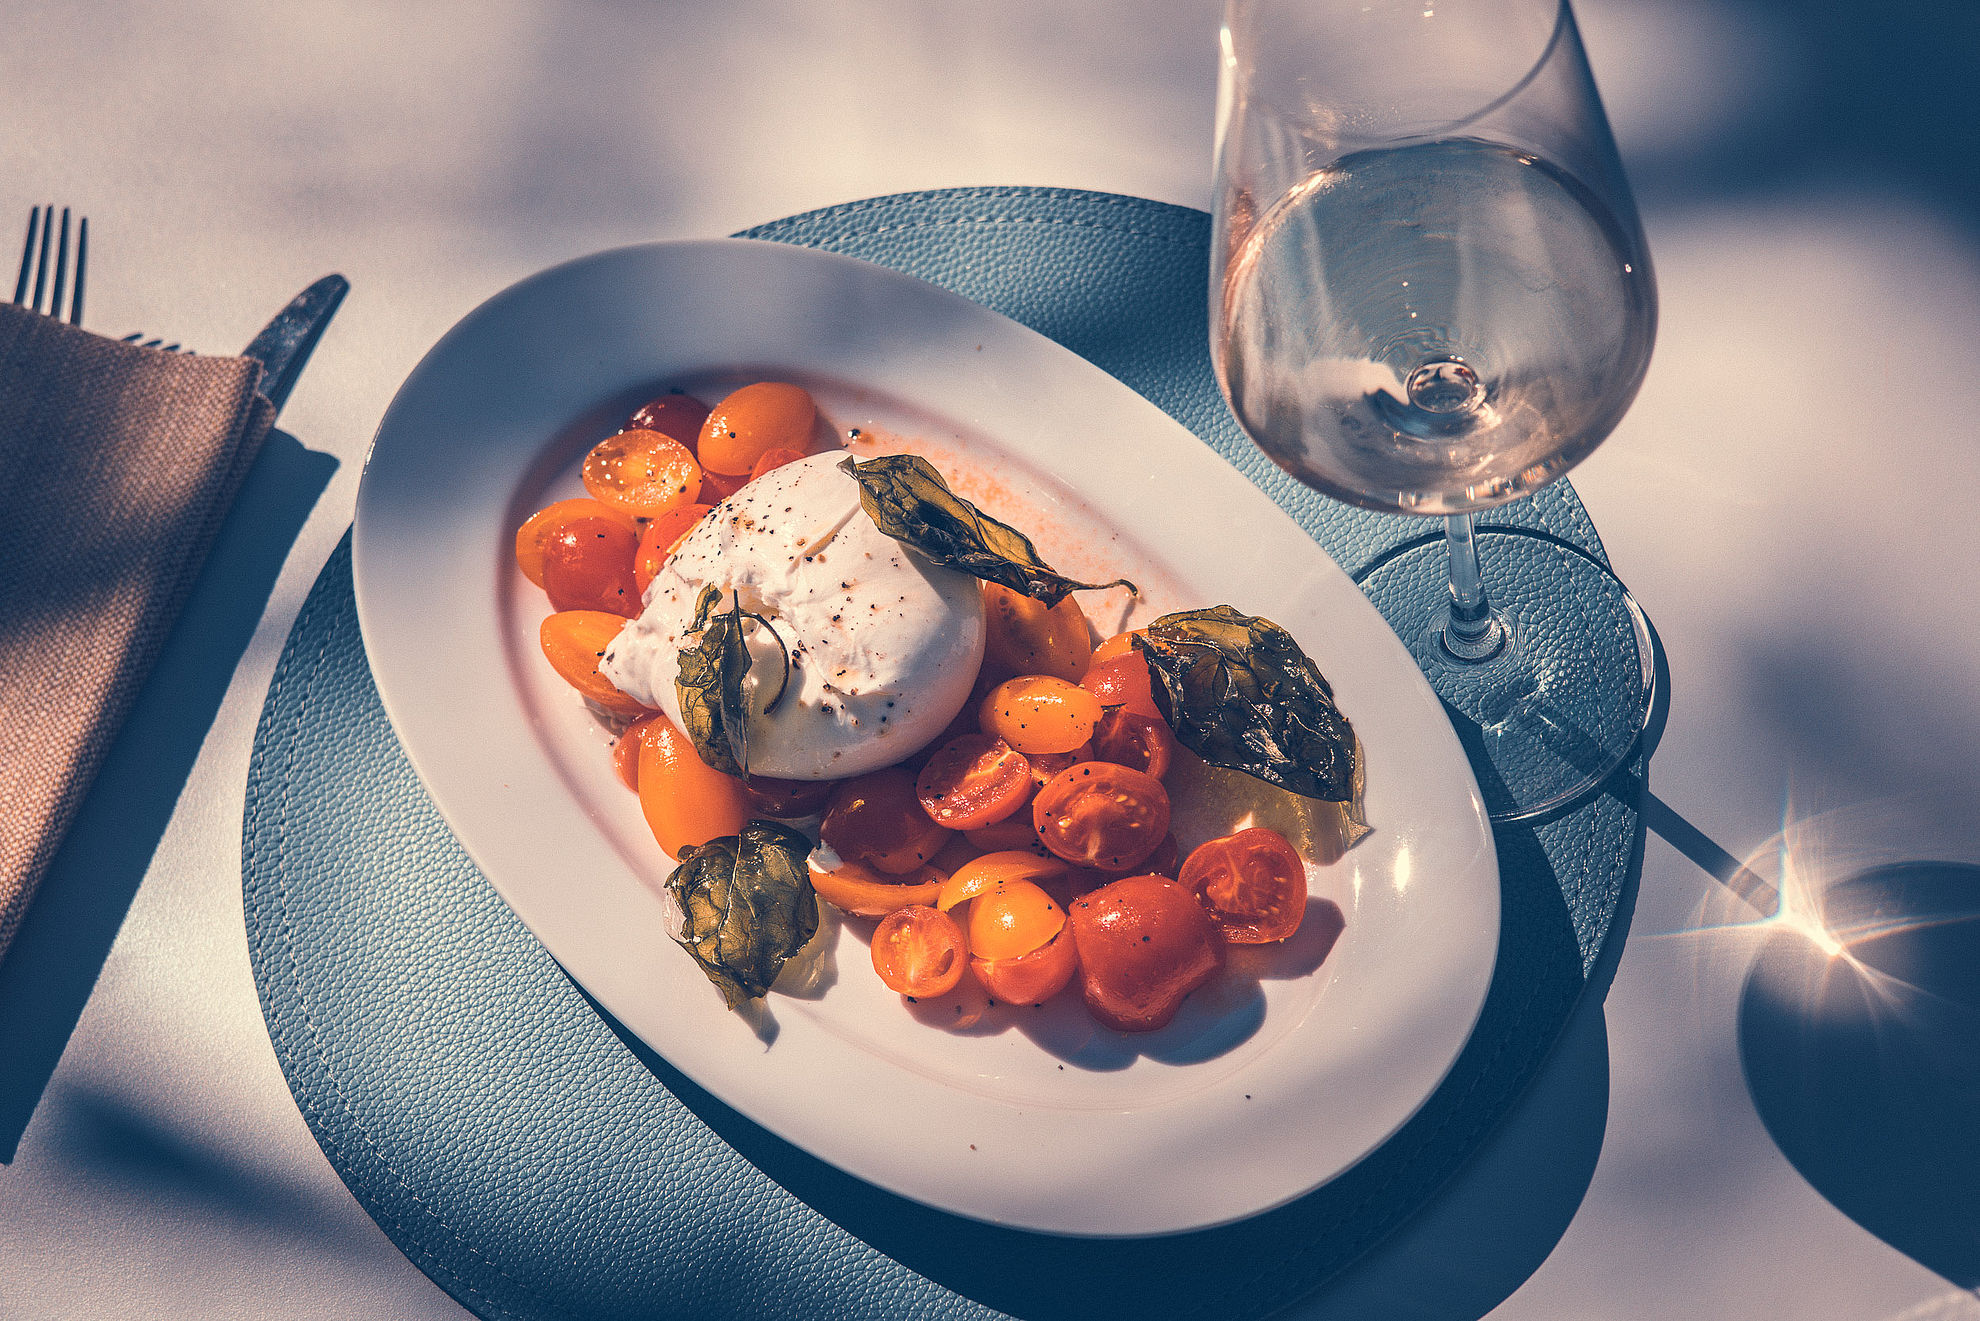 Mozzarella with tomatoes on plate and glass of wine